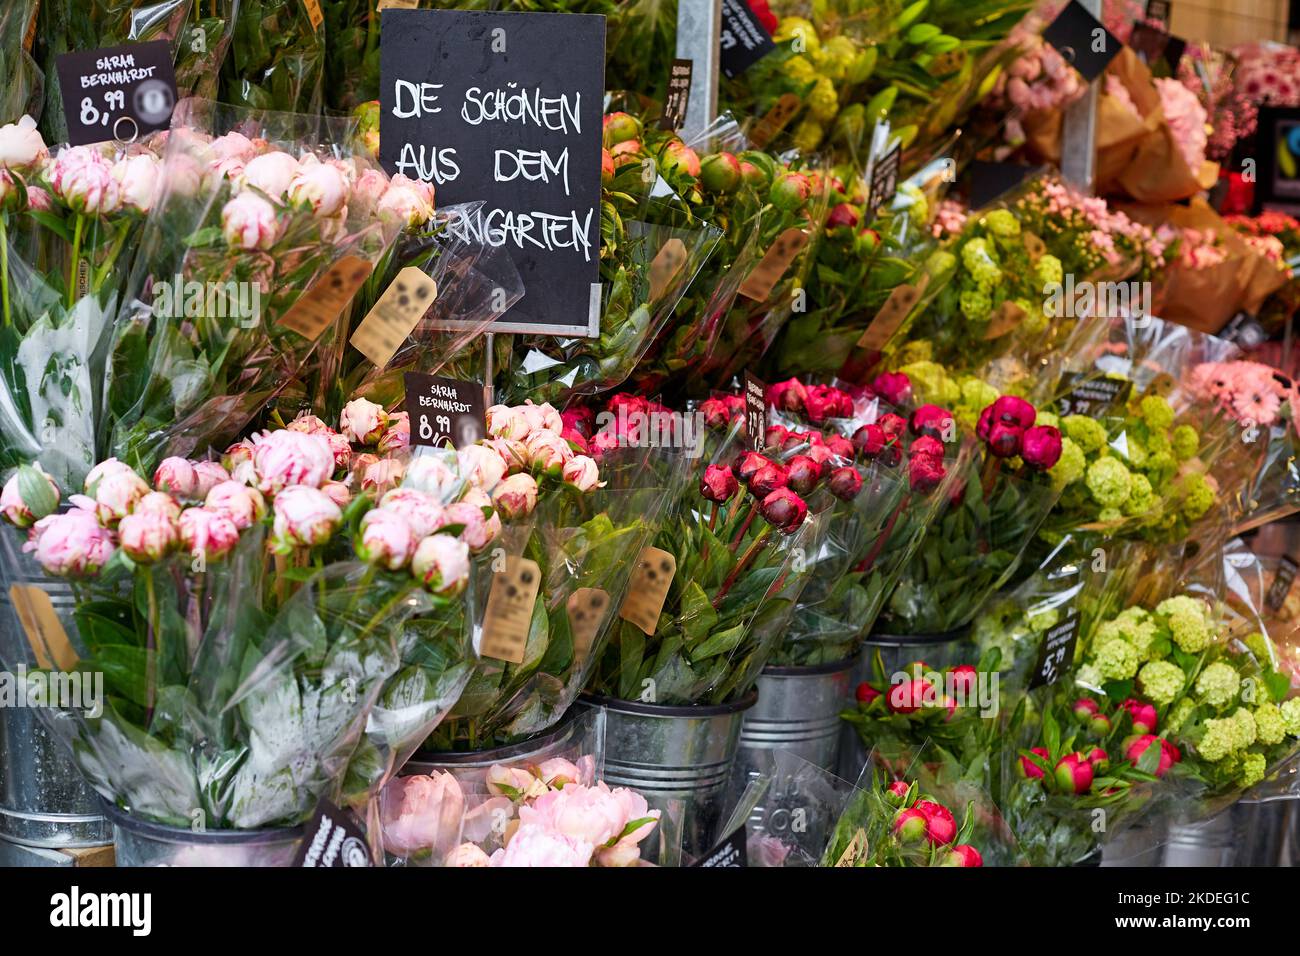 The counter of a flower store in Germany is full of fresh flowers. Stock Photo